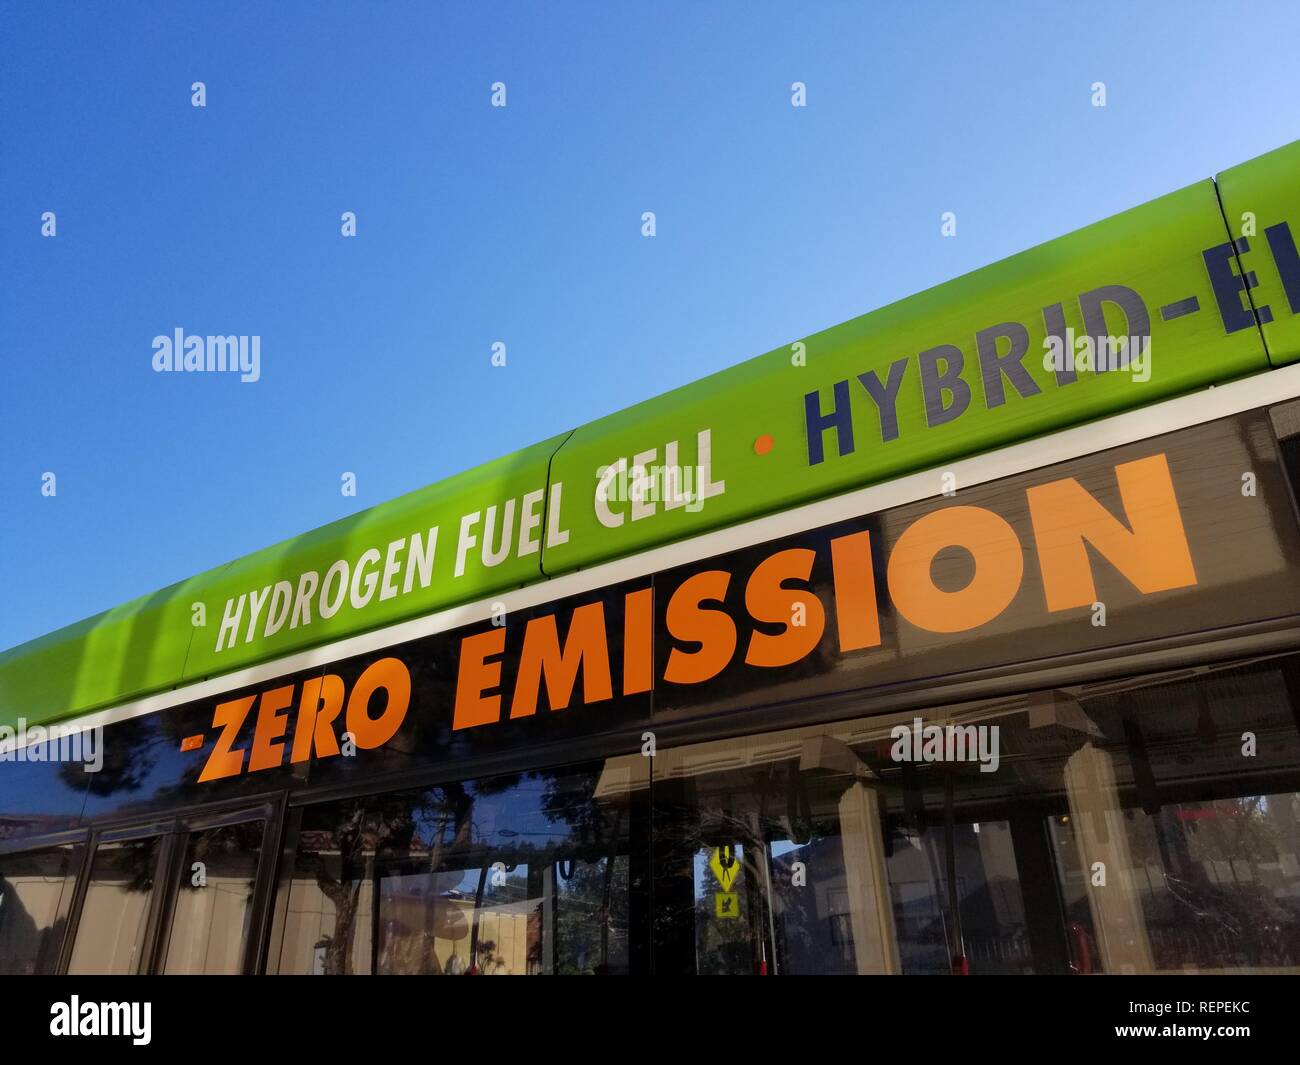 Close-up of text reading Hydrogen Fuel Cell Zero Emission on the side of a city bus in Albany, California, indicating that the bus is powered by a hydrogen fuel cell technology, December 13, 2018. () Stock Photo